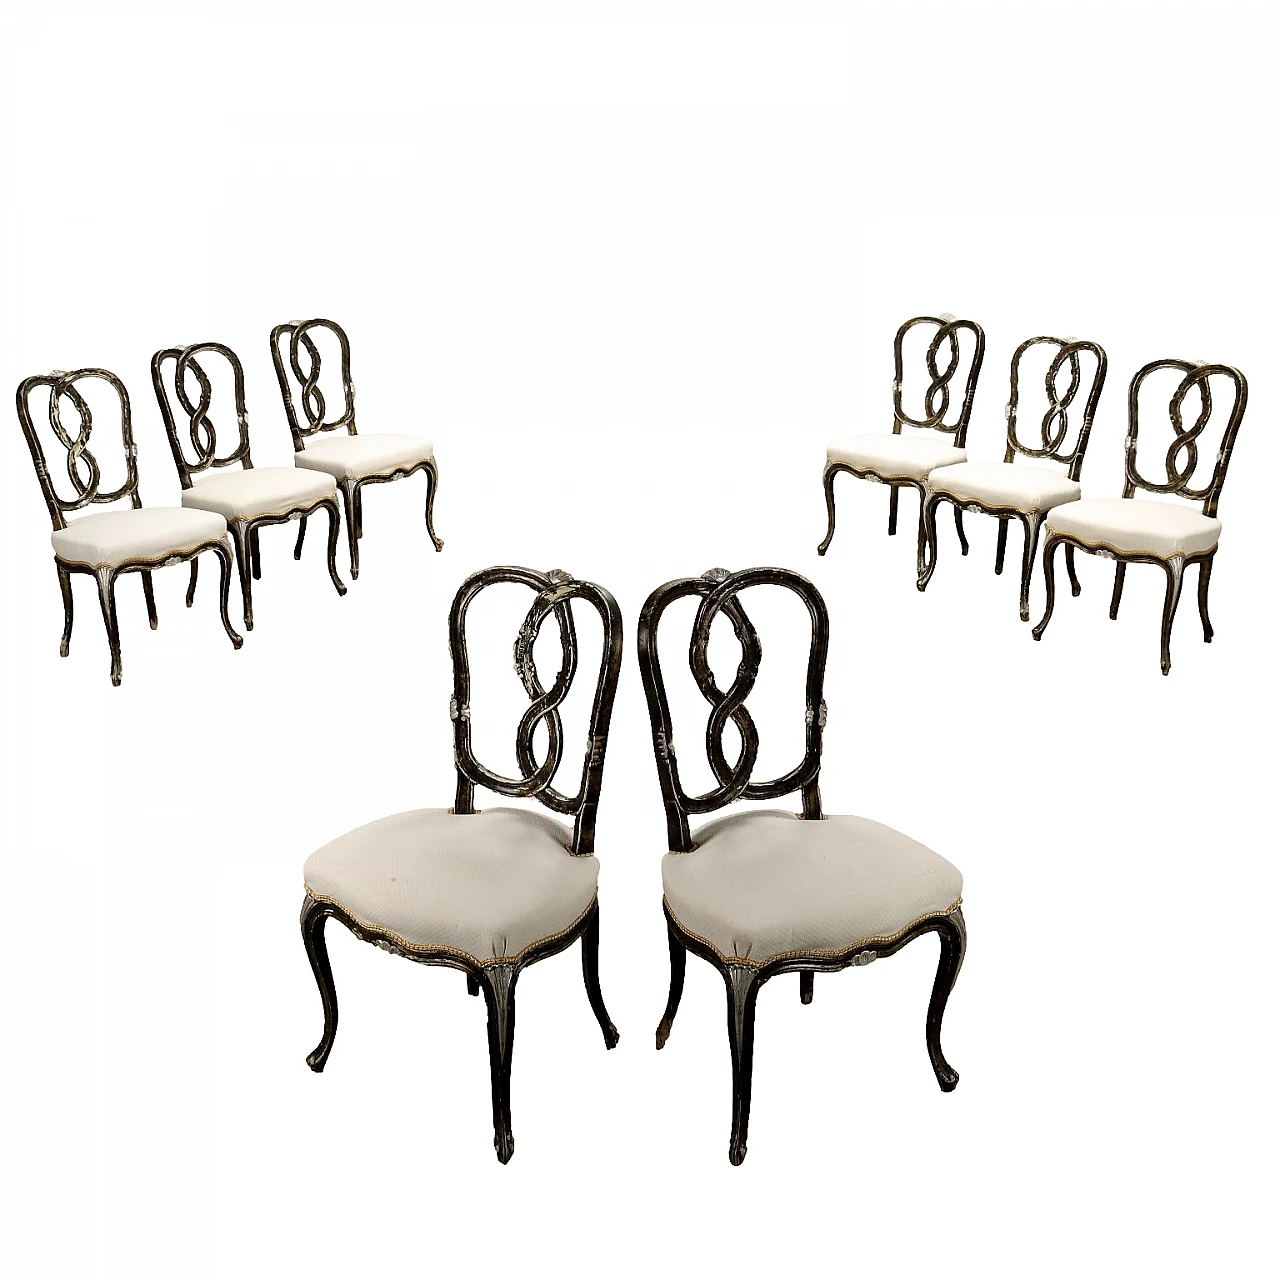 8 chairs with upholstered seats, lacquered and silvered 1